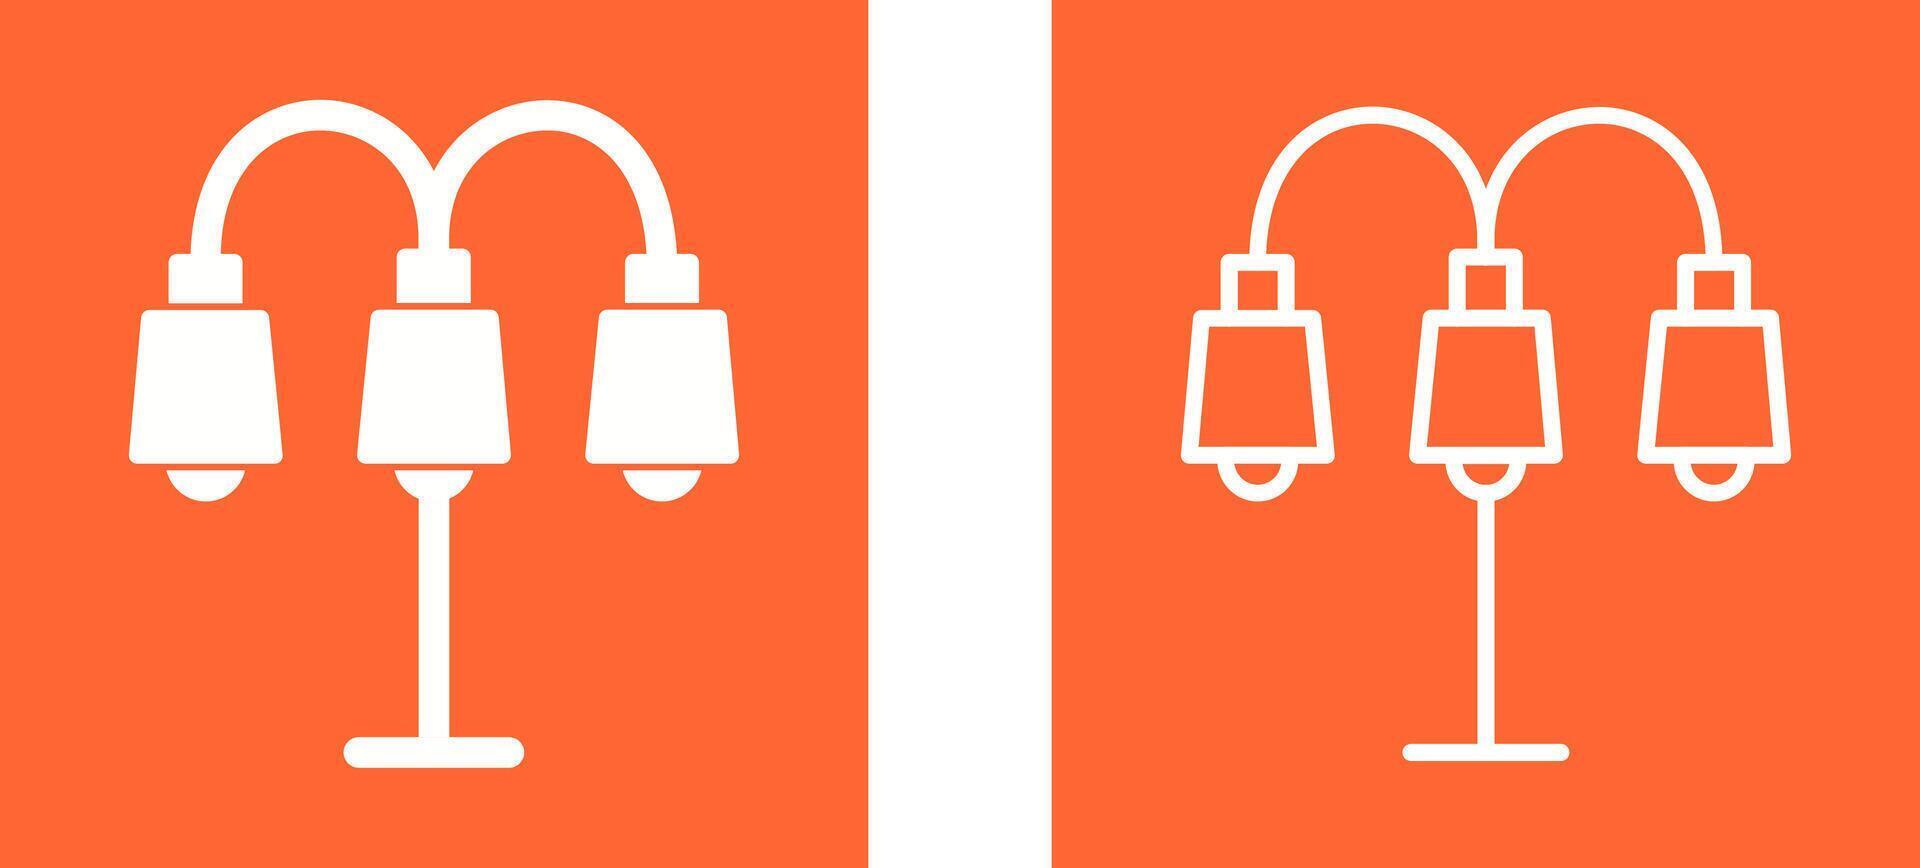 Lamp with stand Vector Icon